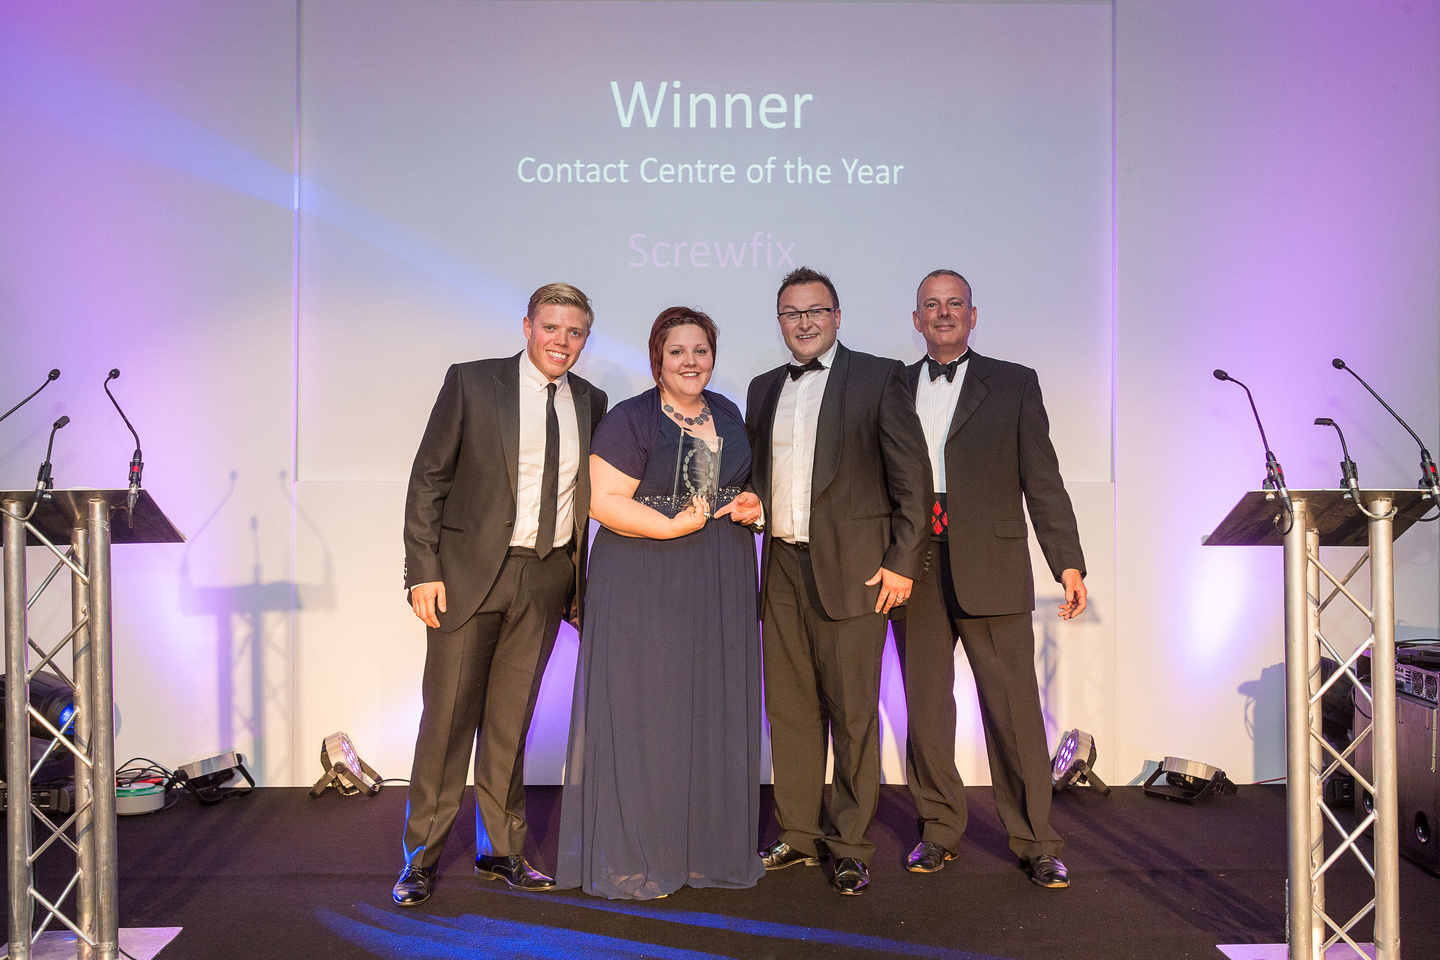 Screwfix receives two accolades at the South West Contact Centre Awards